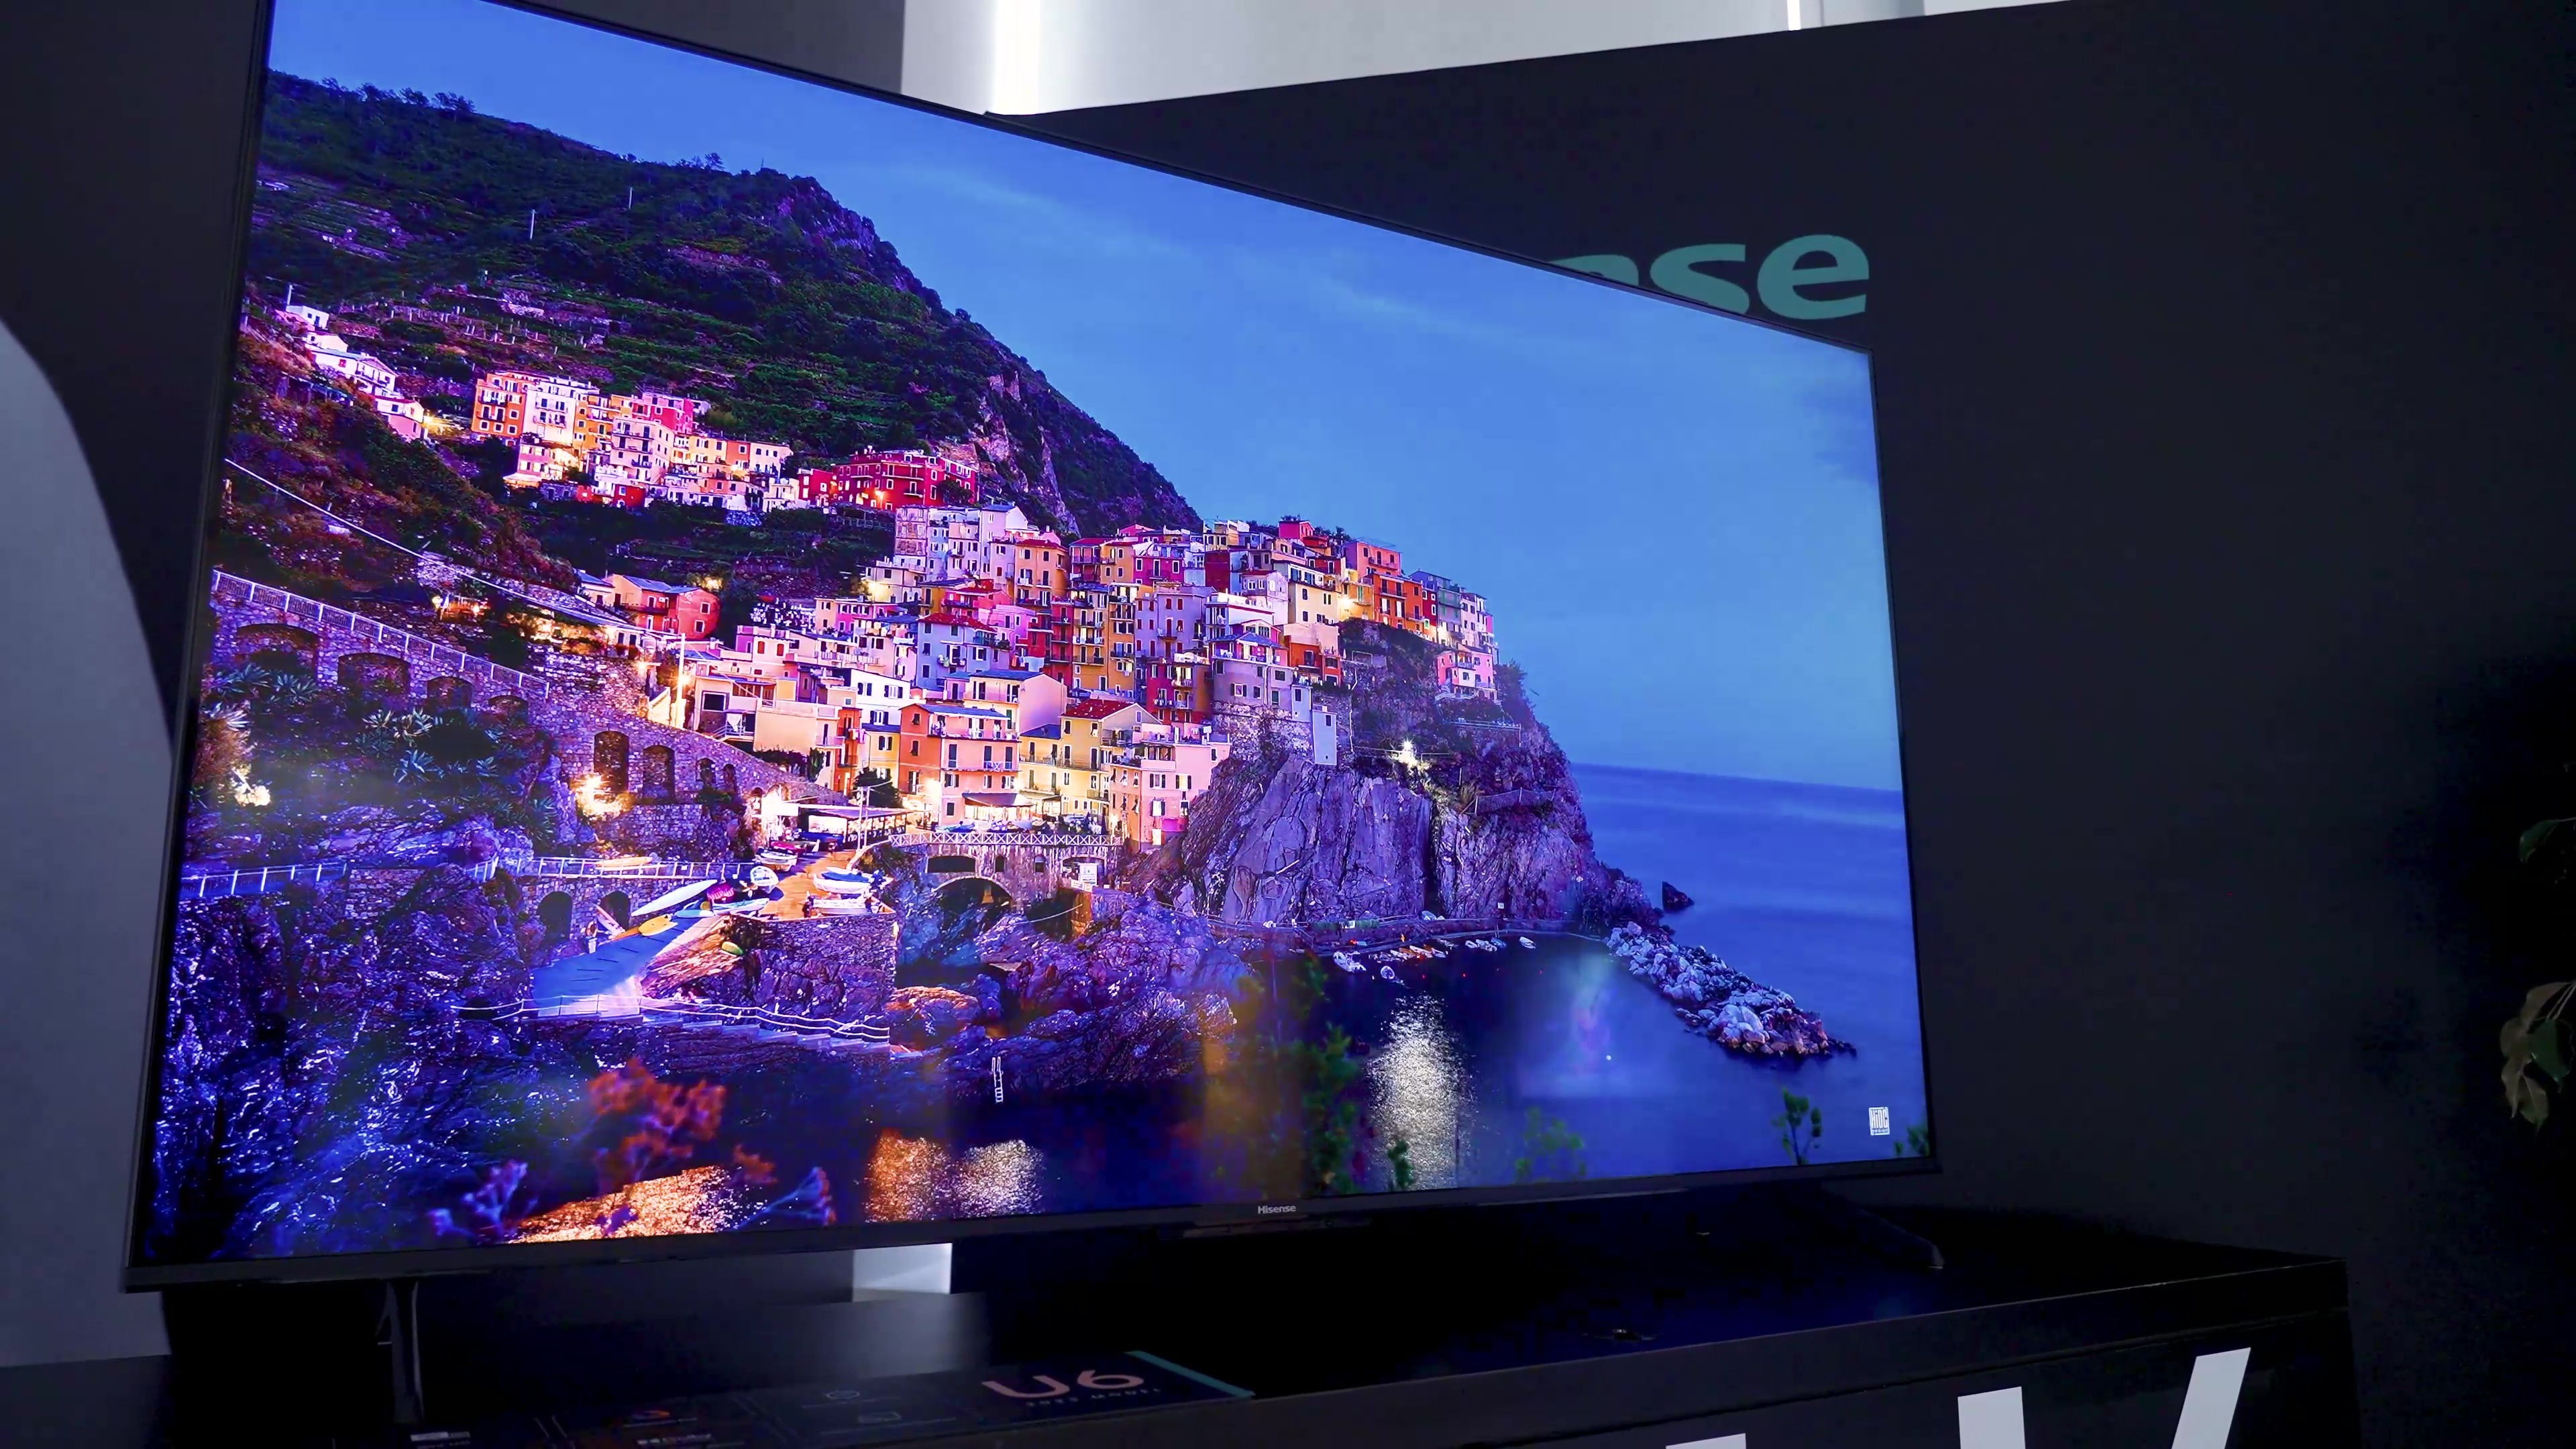 We can finally recommend a Hisense TV - Which? News